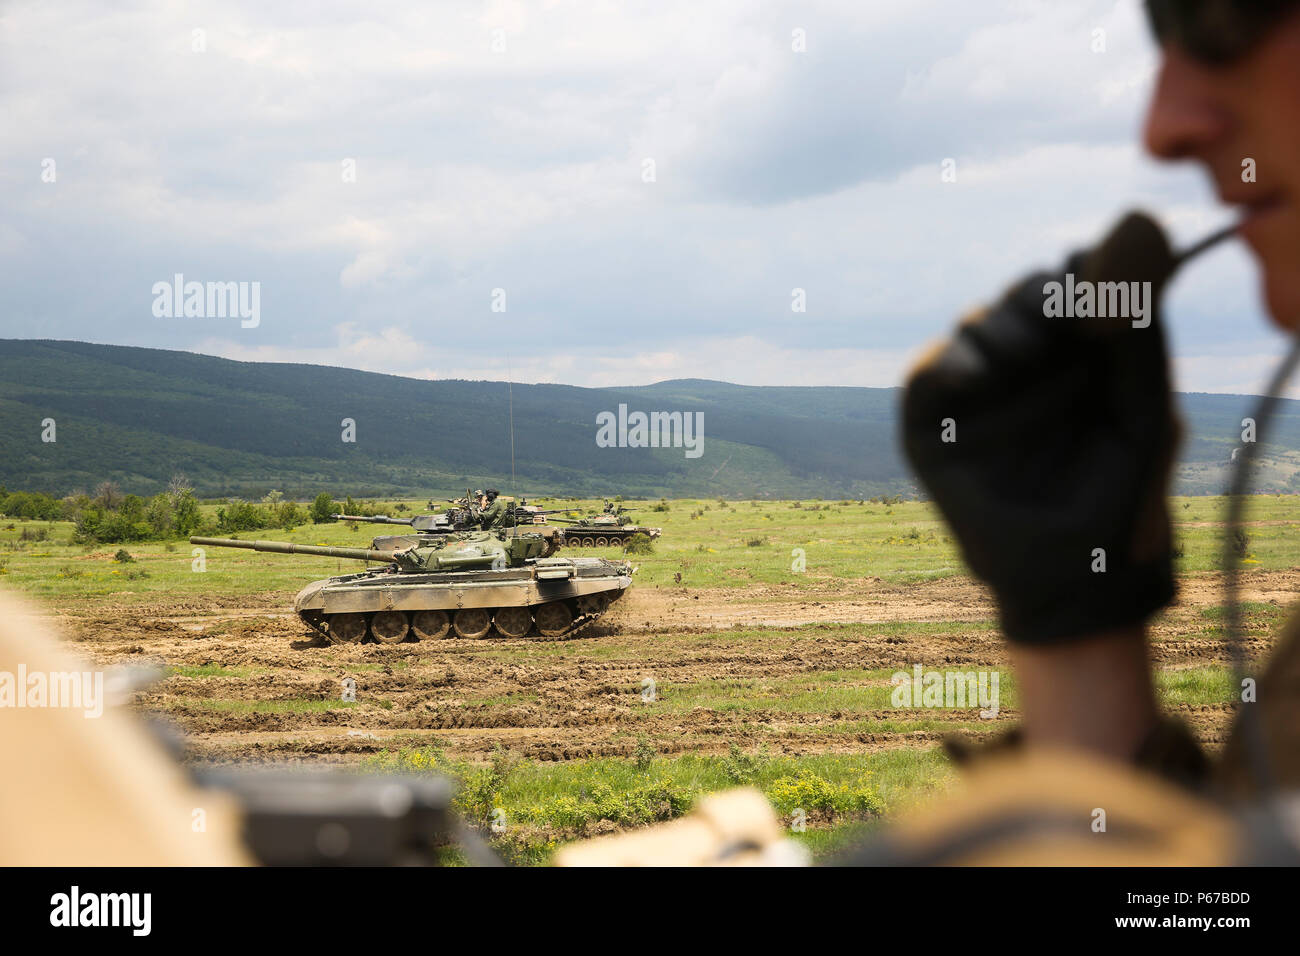 U.S. Marine Corps M1A1 Abrams tanks maneuver downrange alongside Bulgarian T-72 tanks for a tank integration exercise during Platinum Lion 16-3 aboard Novo Selo Training Area, Bulgaria May 11, 2016. During the exercise, Allies from the United States and four partner nations conducted platoon-level mechanized tactics in order to develop proficiency in fire and maneuver. (U.S. Marine Corps photo by Cpl. Immanuel M. Johnson/Released) Stock Photo